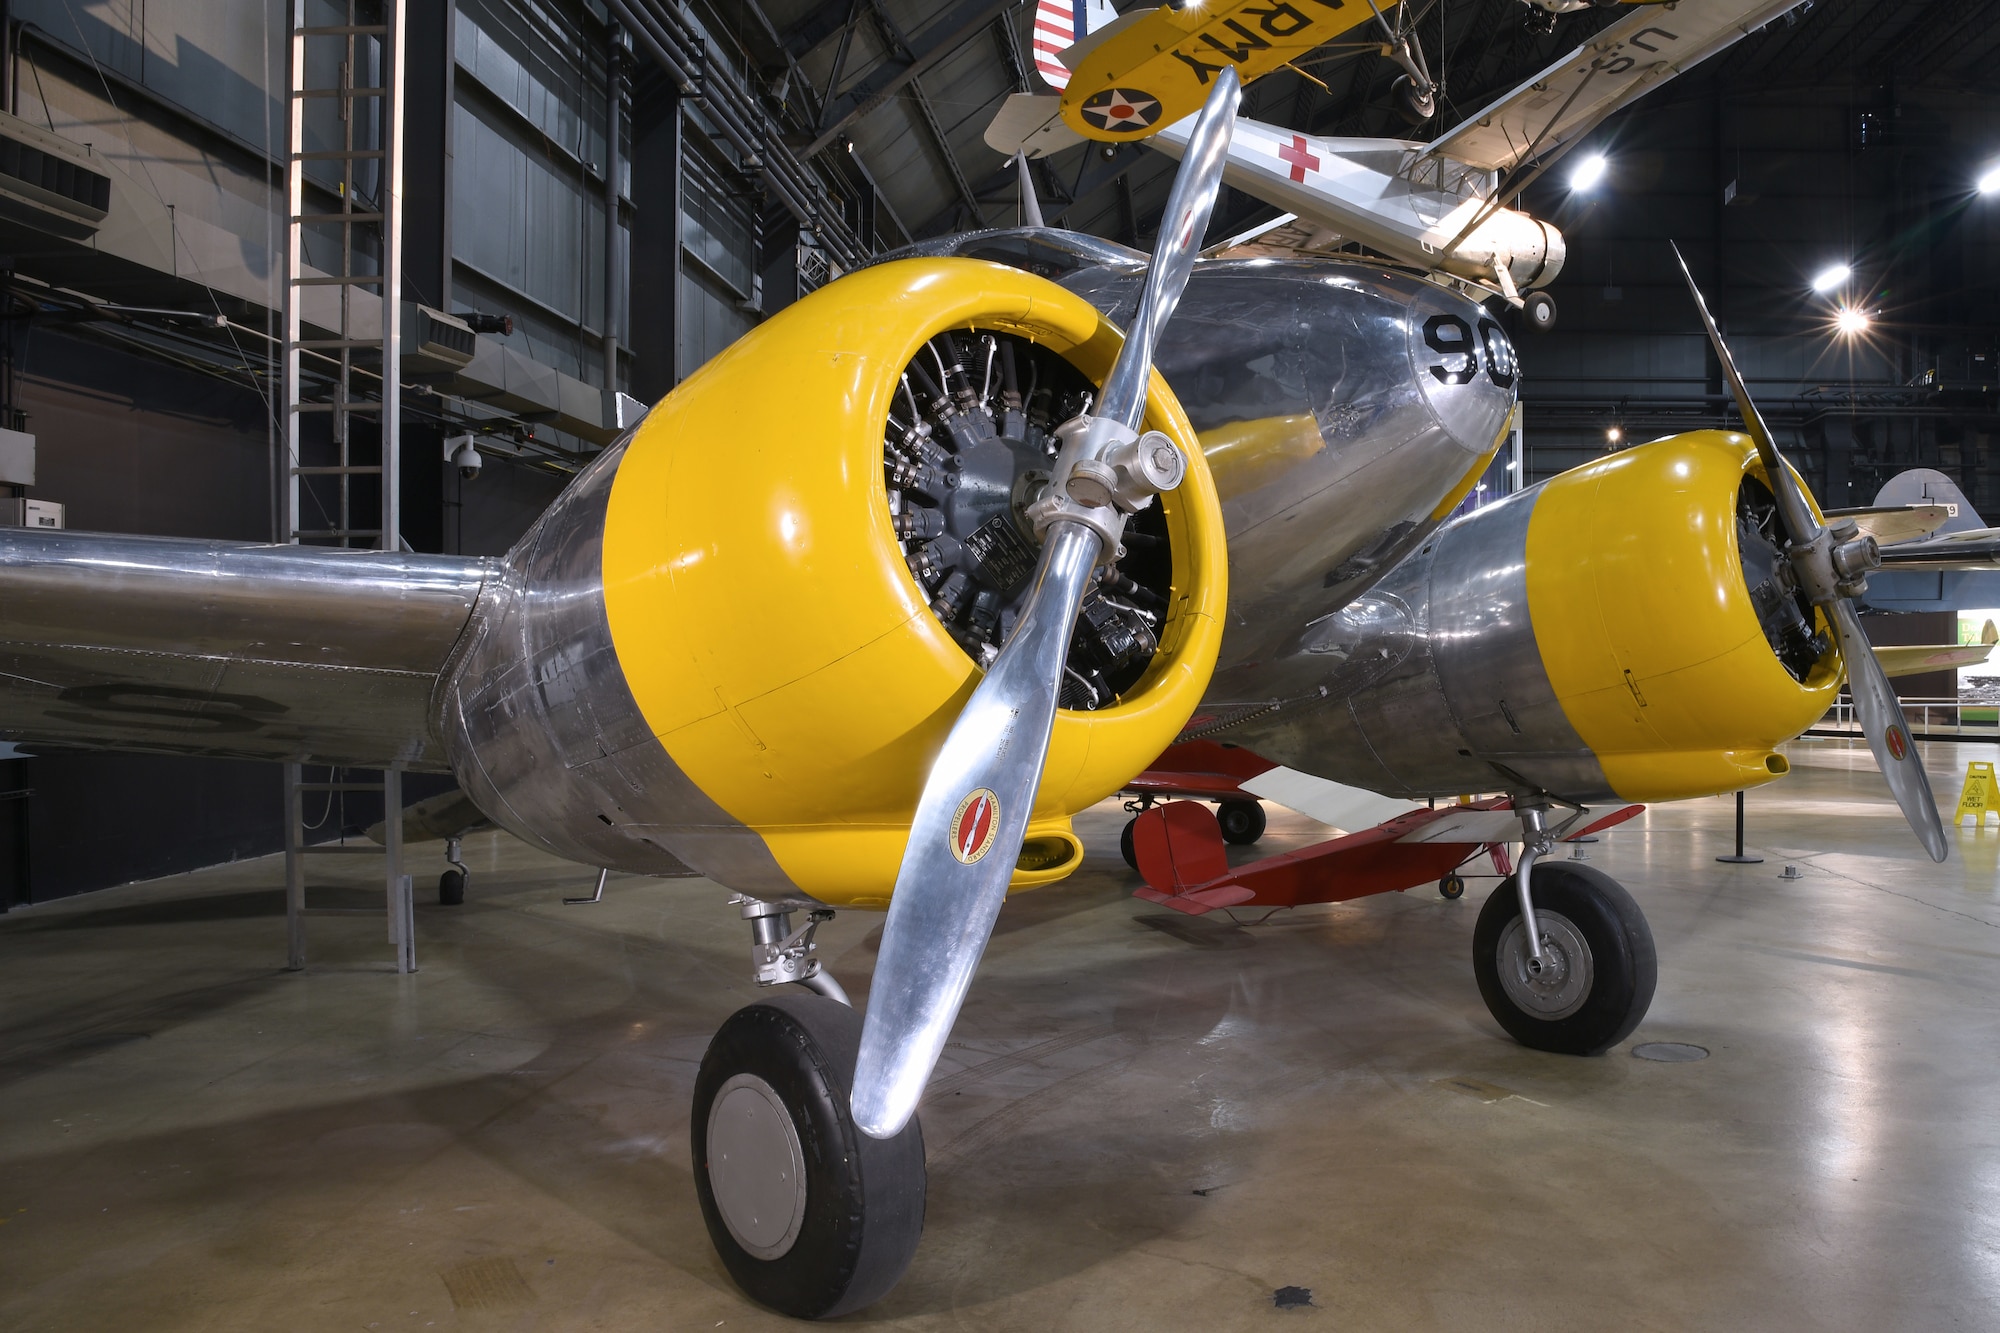 DAYTON, Ohio -- Curtiss AT-9 Jeep/Fledgling in the WWII Gallery at the National Museum of the United States Air Force. (U.S. Air Force photo by Ken LaRock)